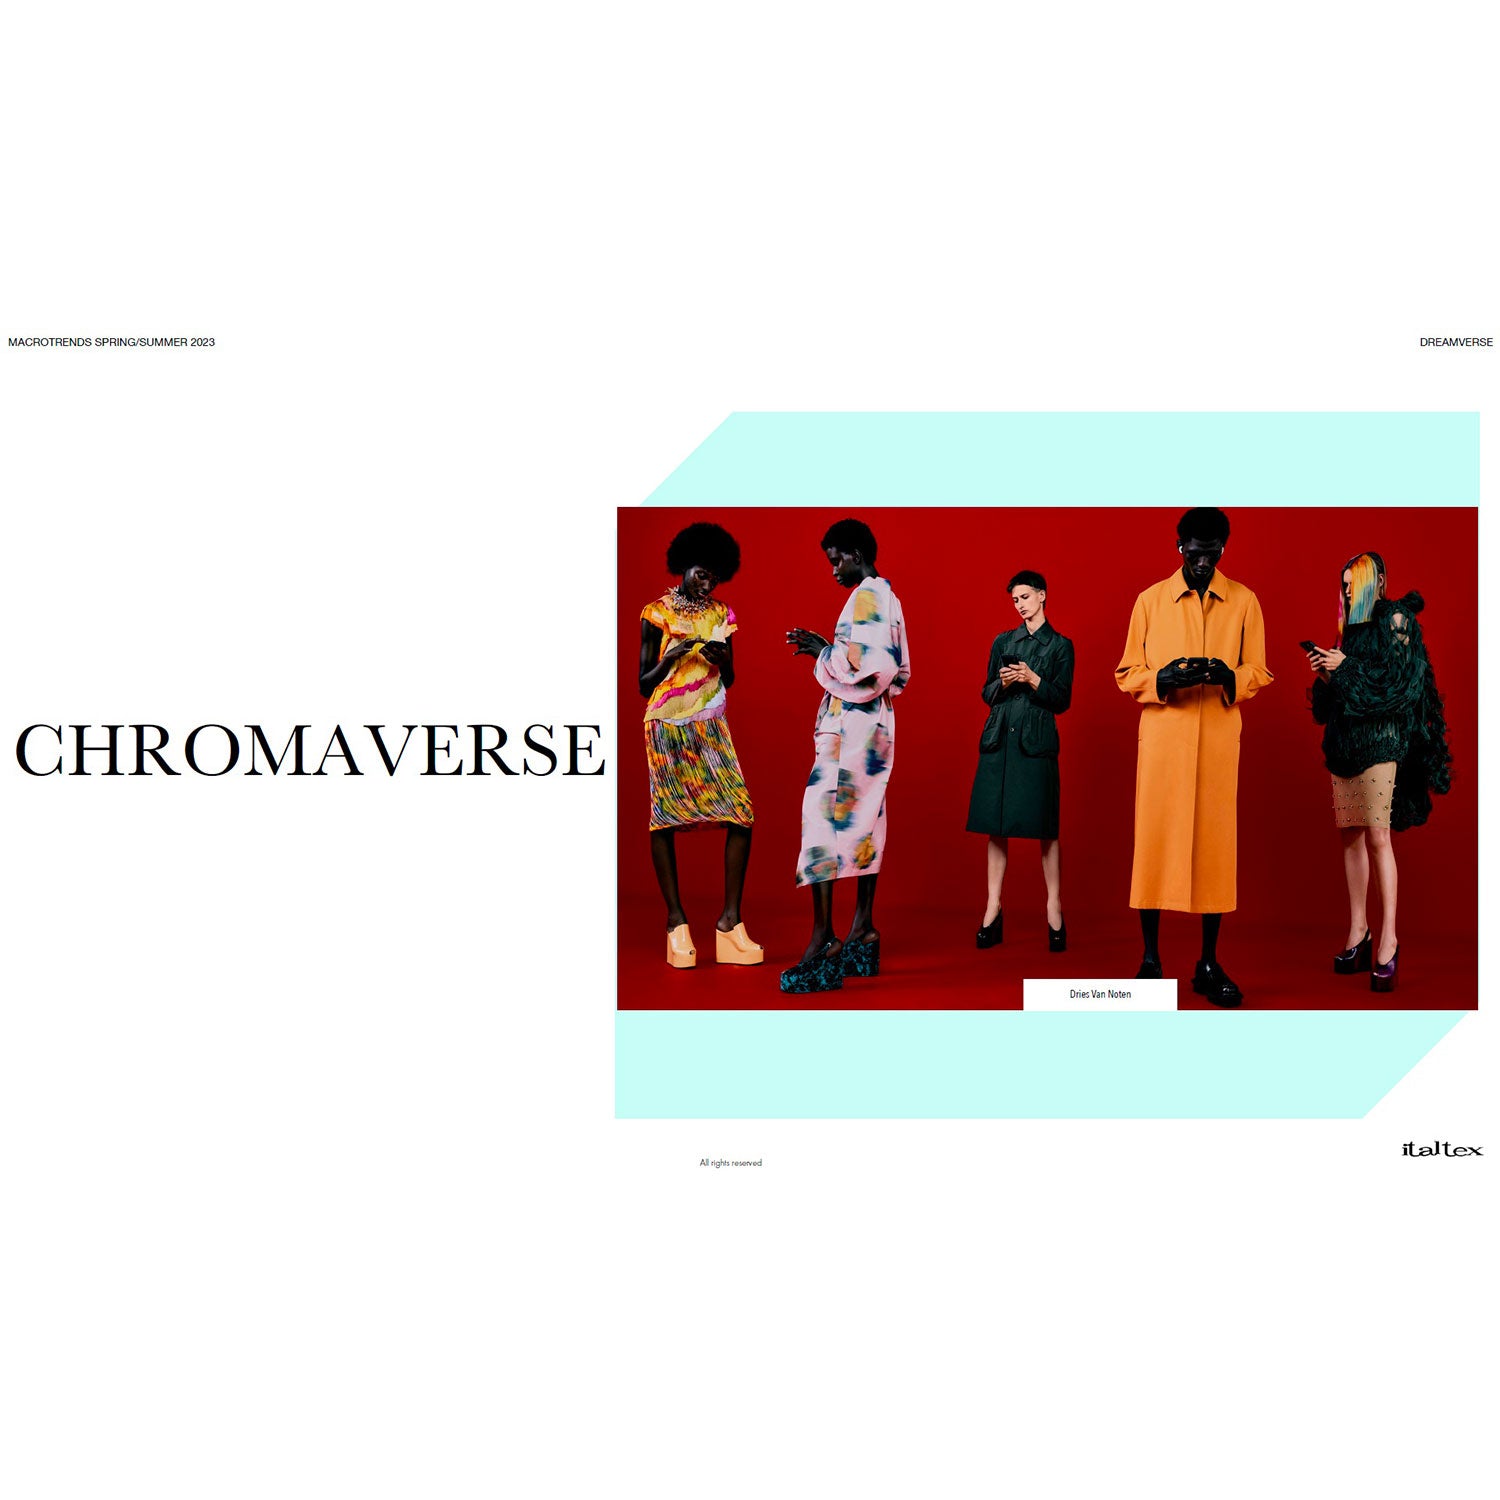 The picture introducing the color trend of Chromaverse shows five weomen busy with their smart phones. Burgundy ground. One wears an orange dress, another one a printed dress with a white ground; anotherone a fancy printed dress; one wears a light coat, and another one a balck jacket and beige skirt